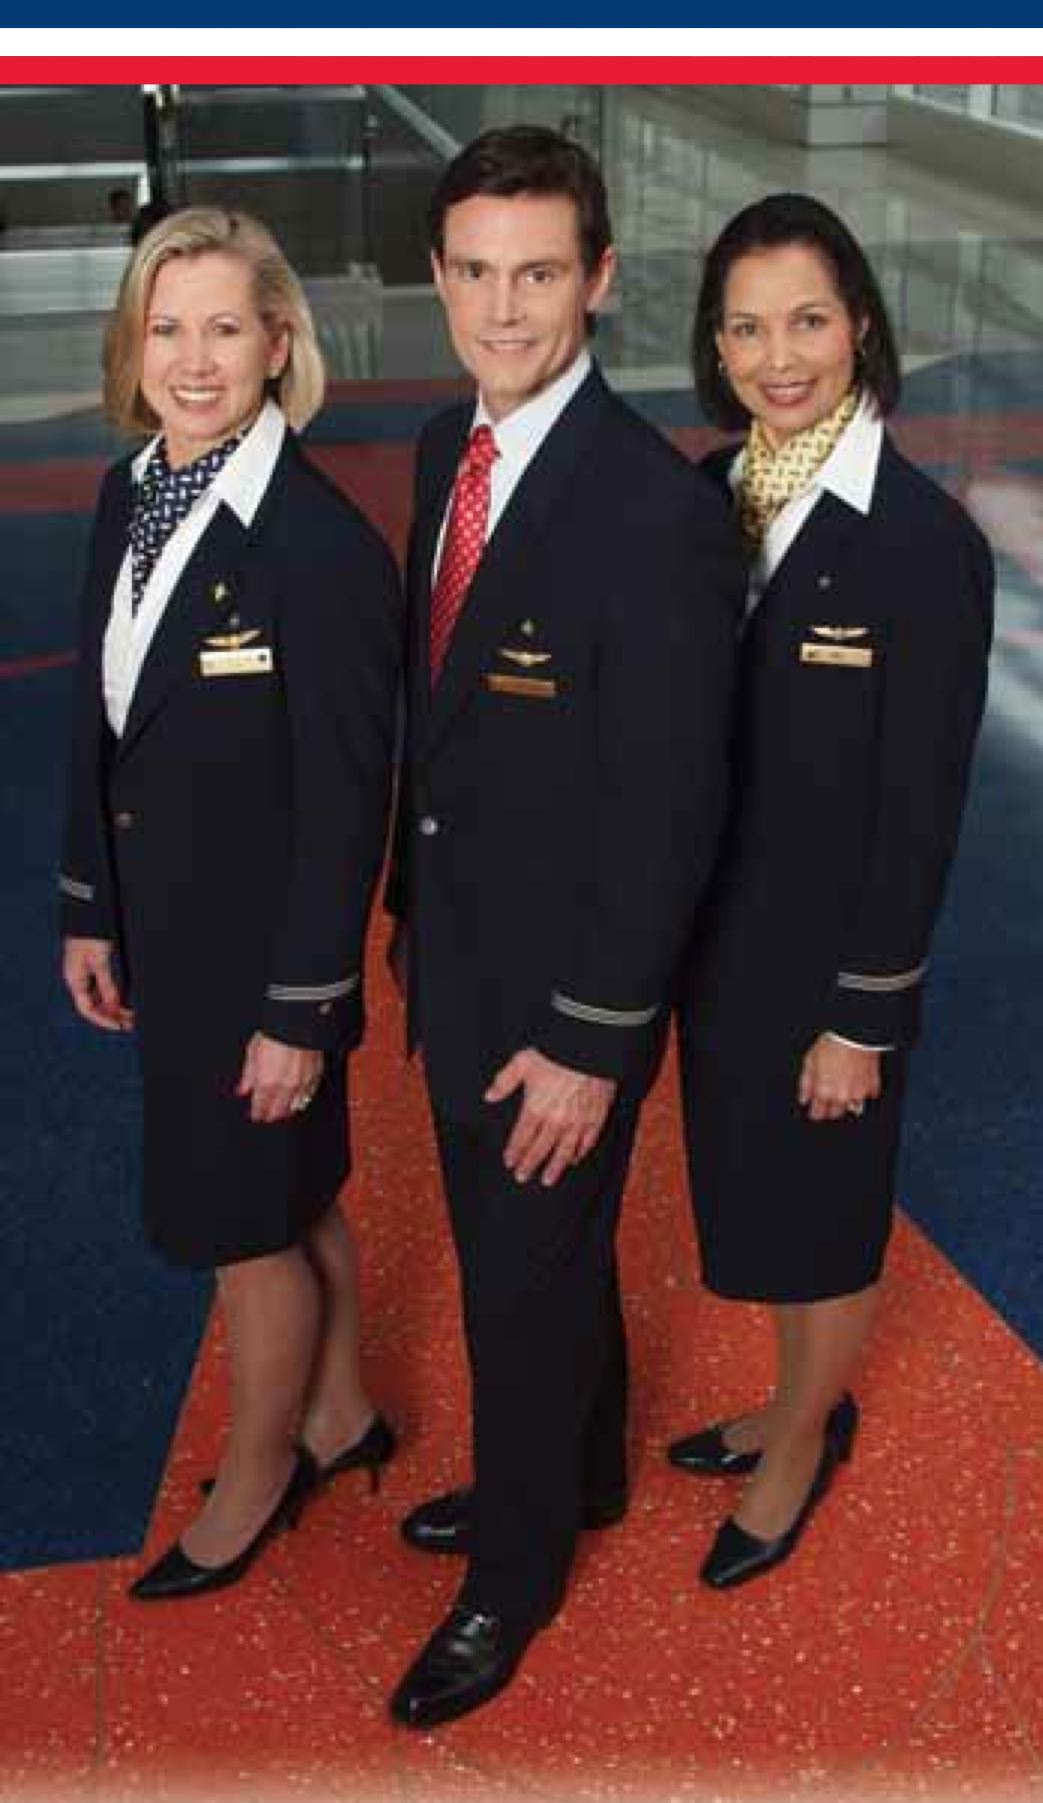 American Airlines Refreshes Flight Attendants on Article 5 of the